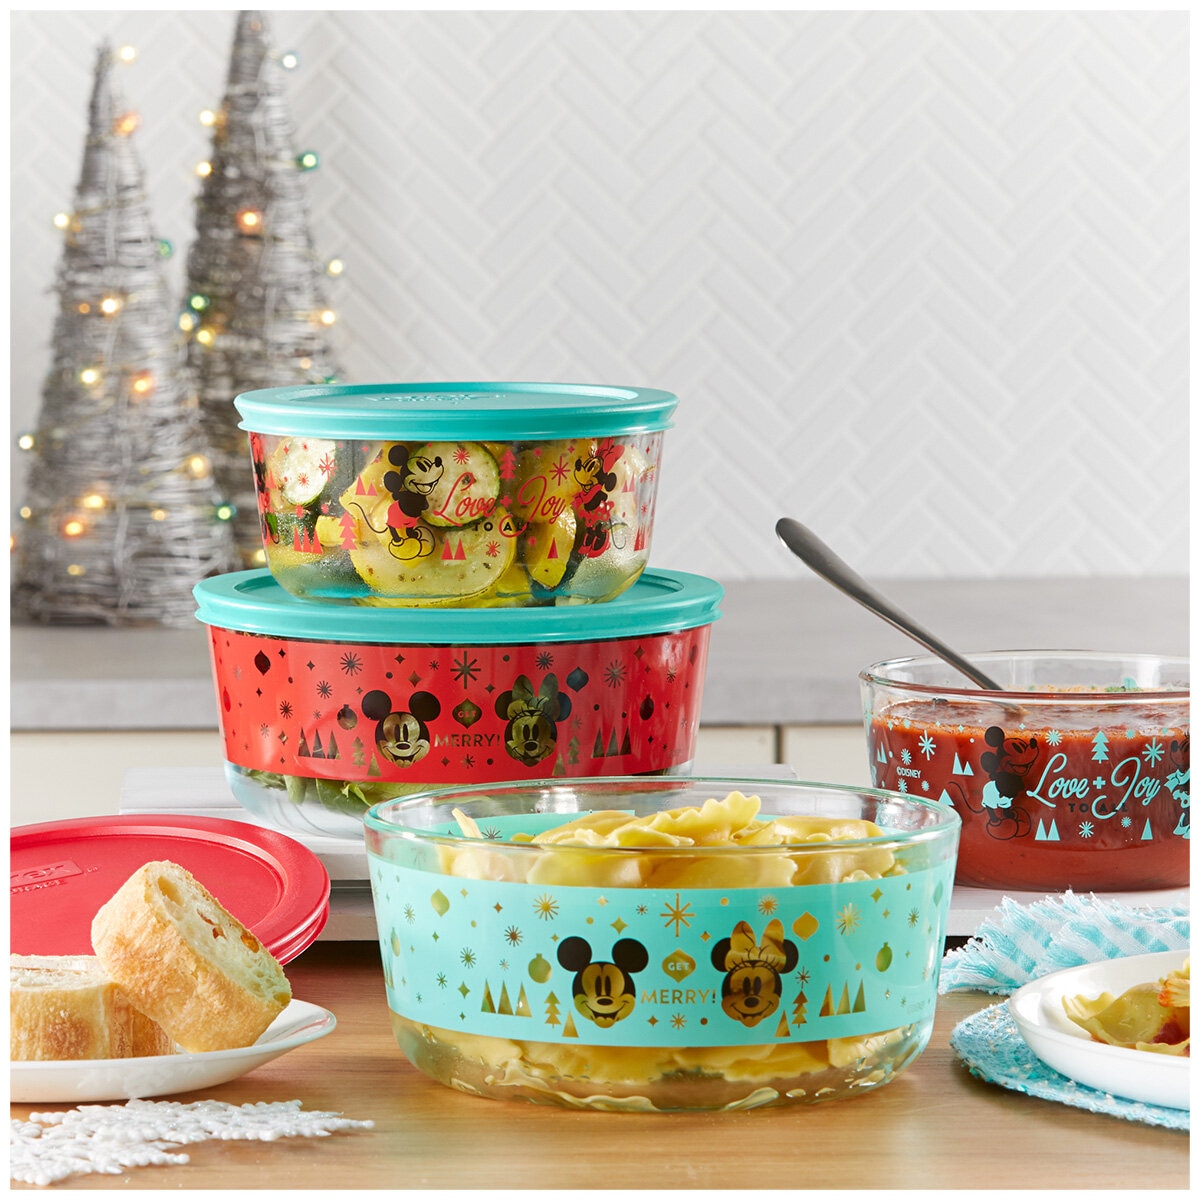 Pyrex Is Now Selling a Special Edition Mickey Mouse Collection